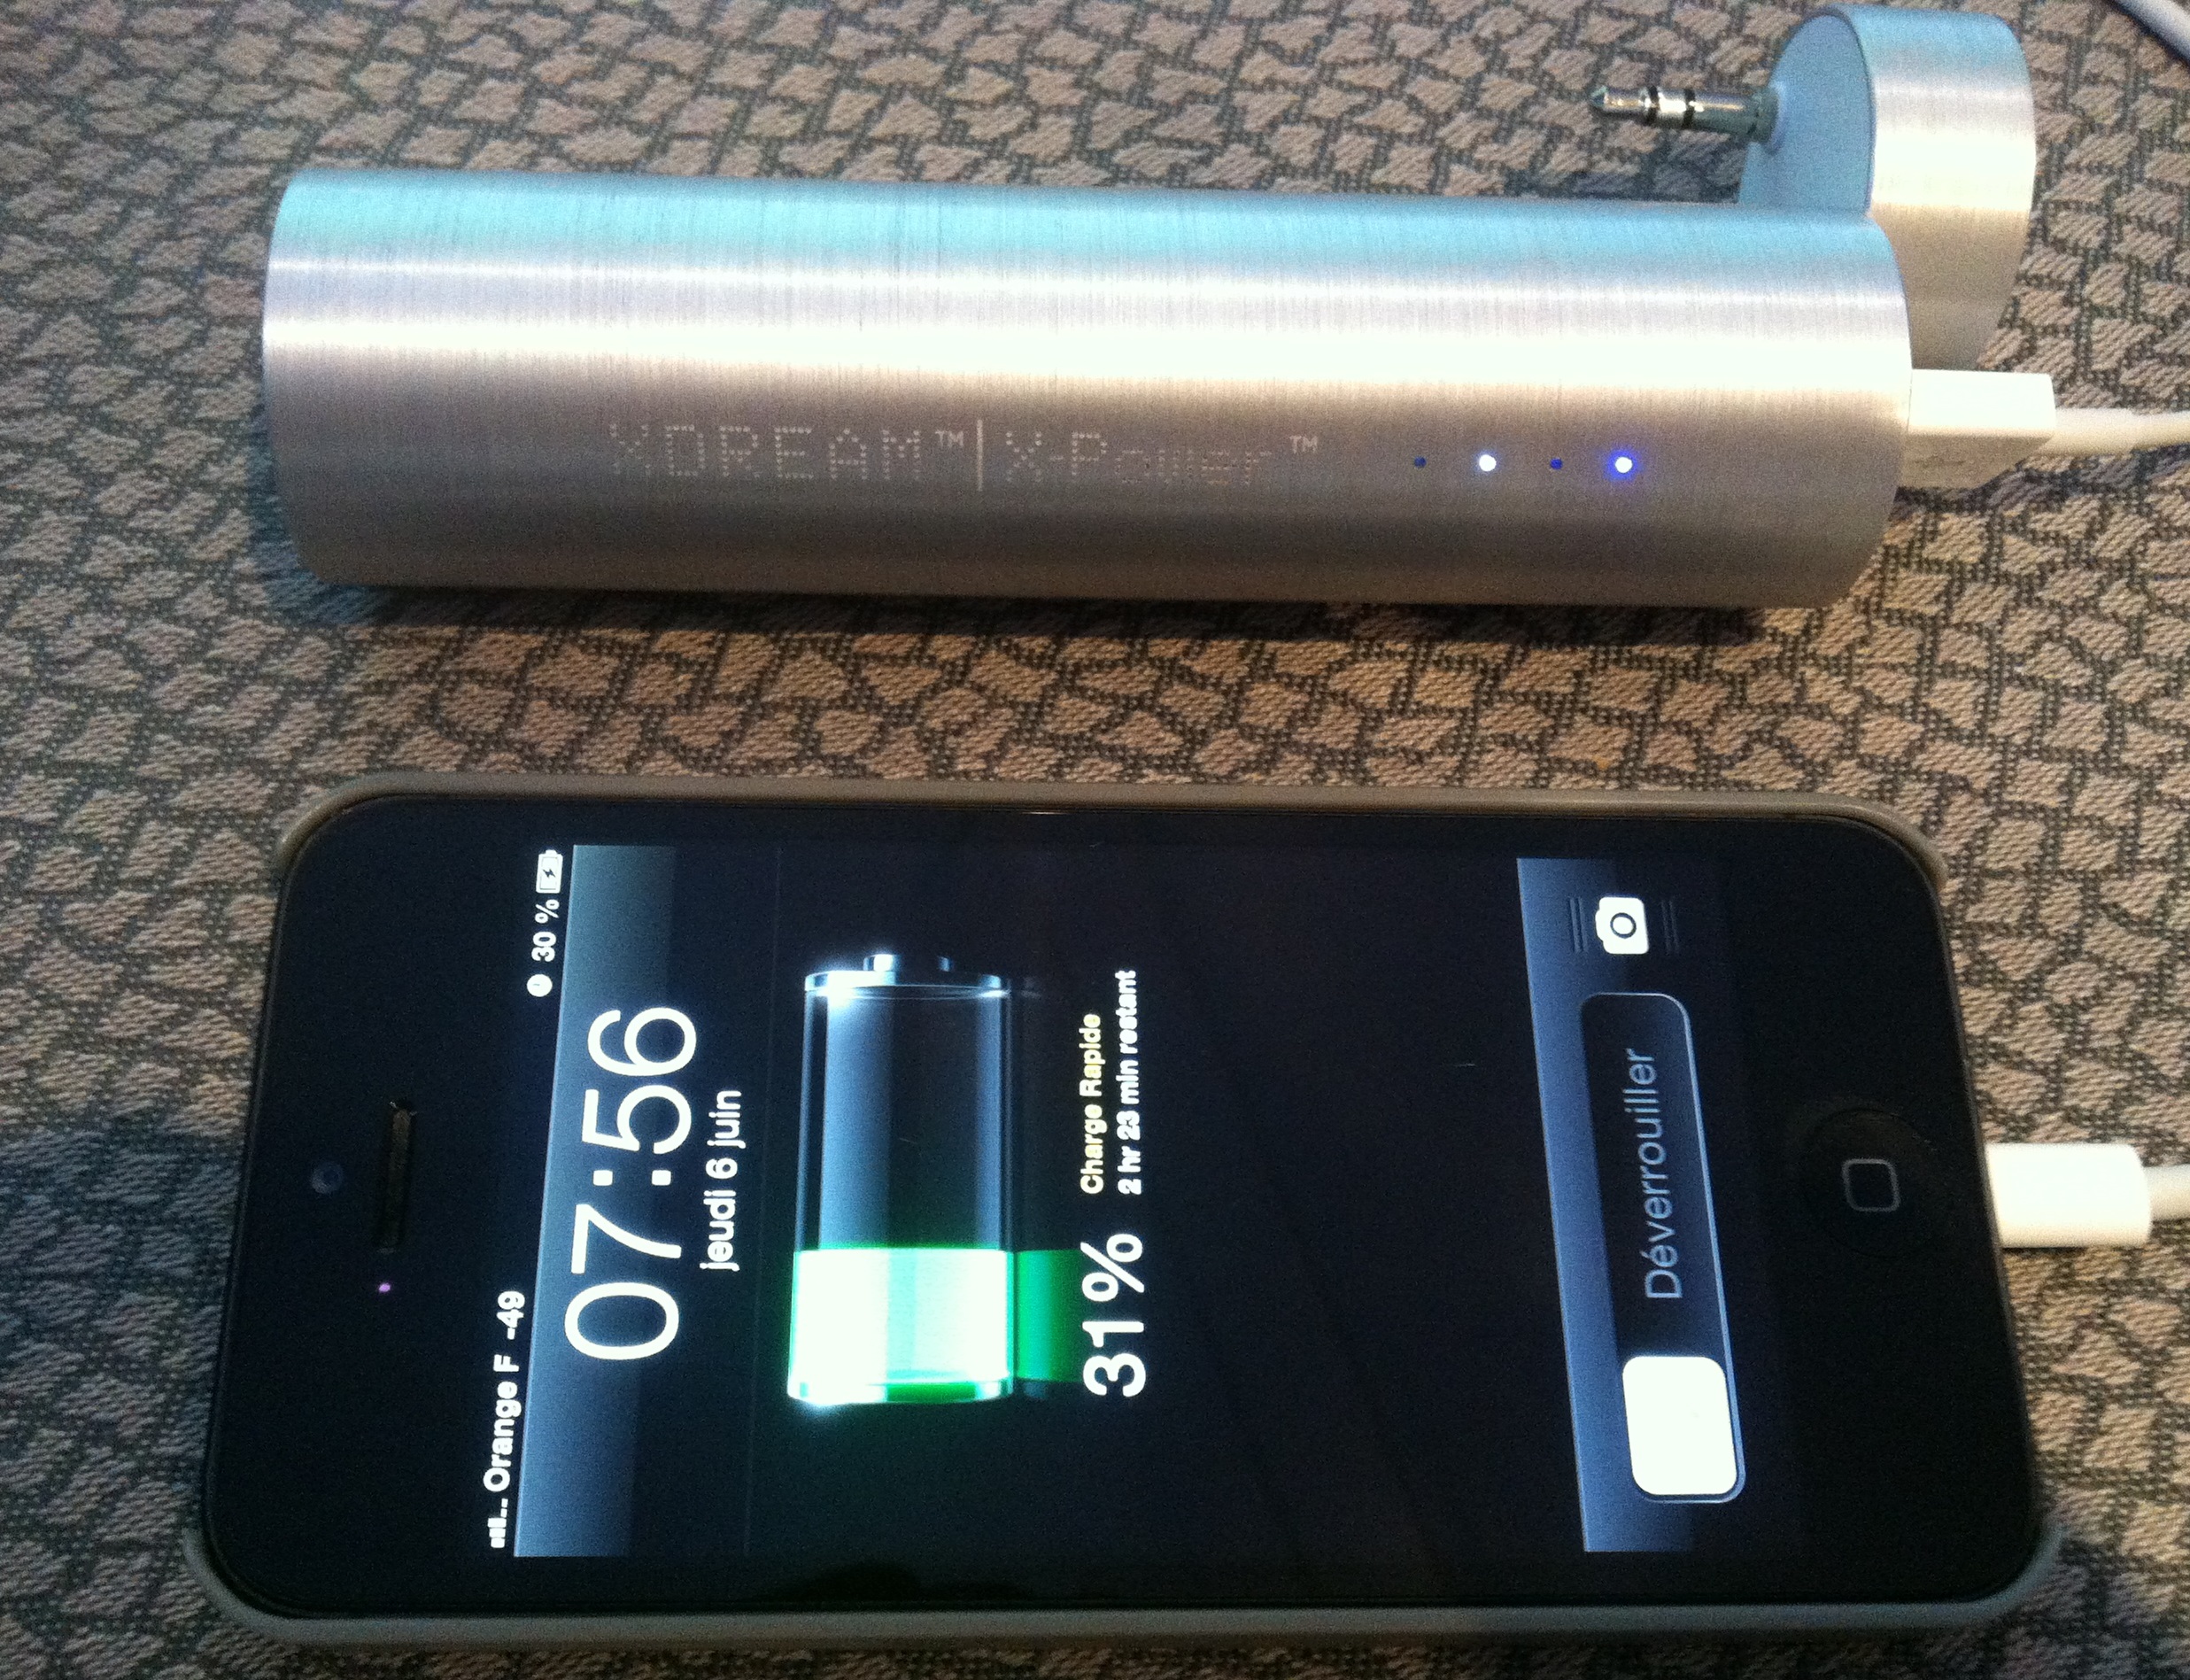 xpower3 - 3-in-1 X-Power test: speaker, backup battery and display support